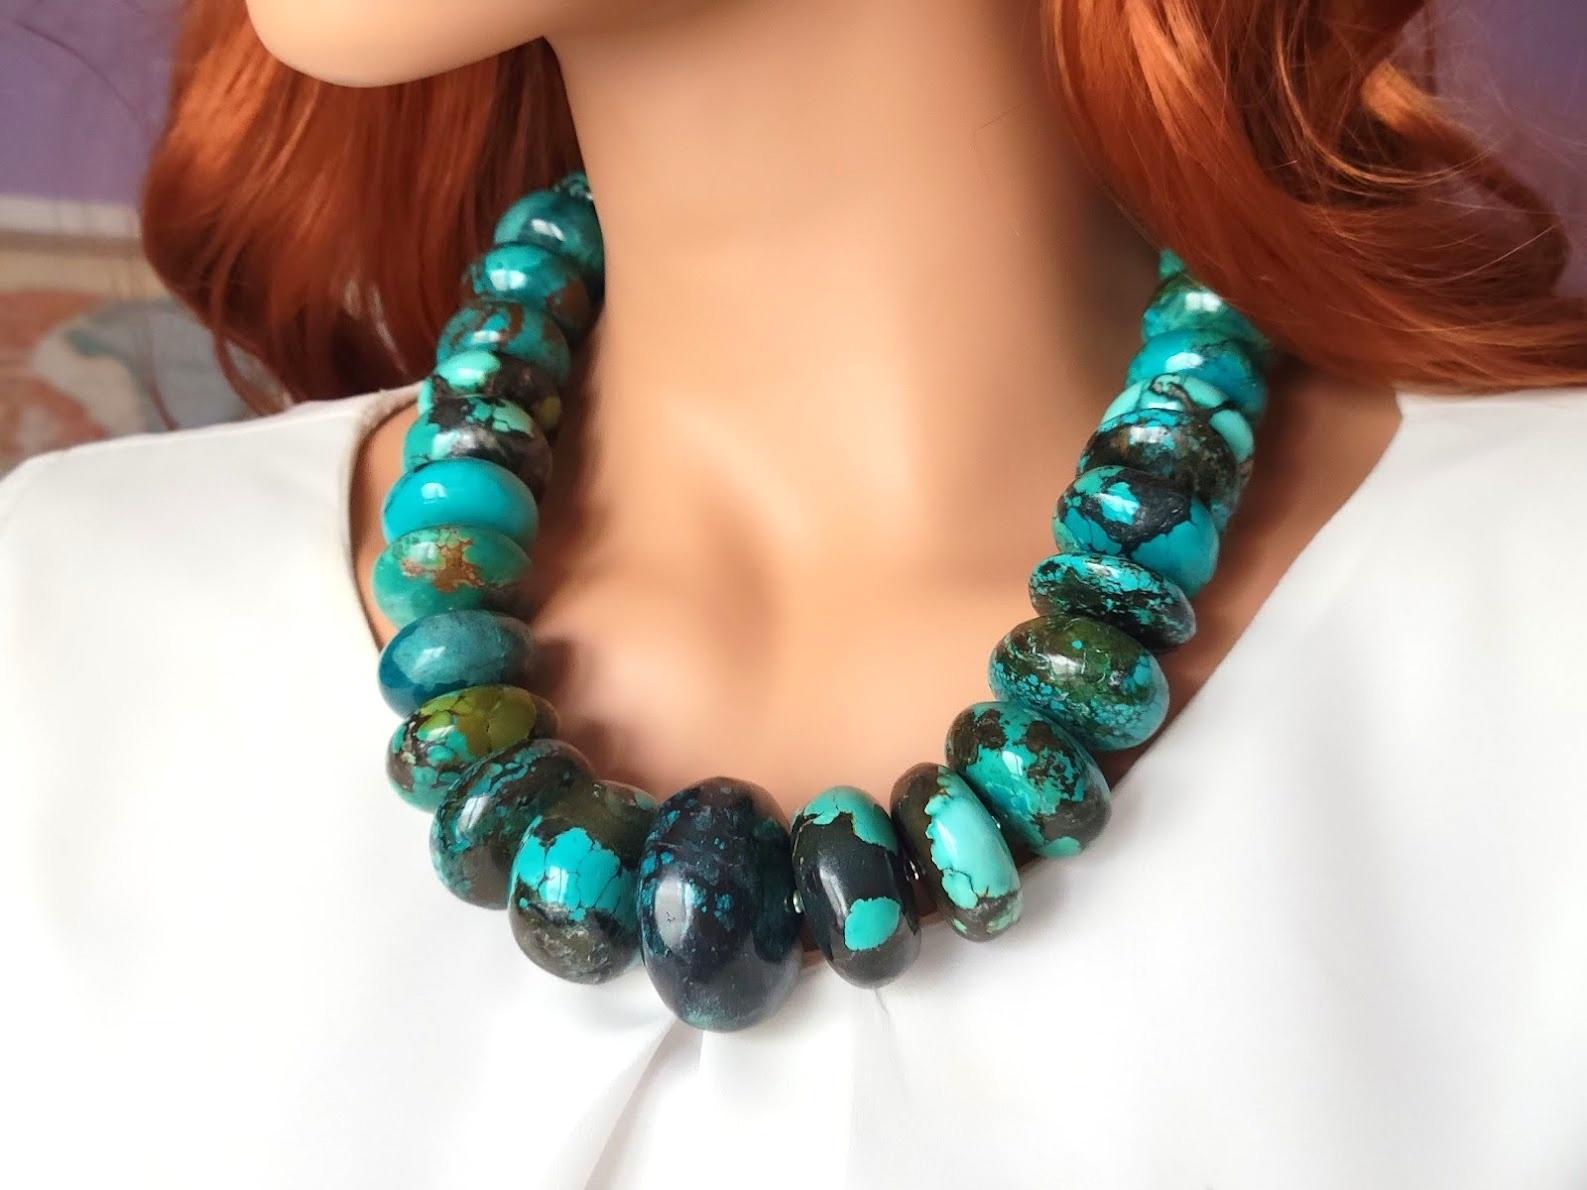 The length of the necklace is 22 inches (56 cm). The size of the rondelle beads varies from 16 mm to 40 mm.
Turquoise ranges in color from a light shade of green to light blue to a beautiful dark blue. Turquoise beads have a dark brown or black